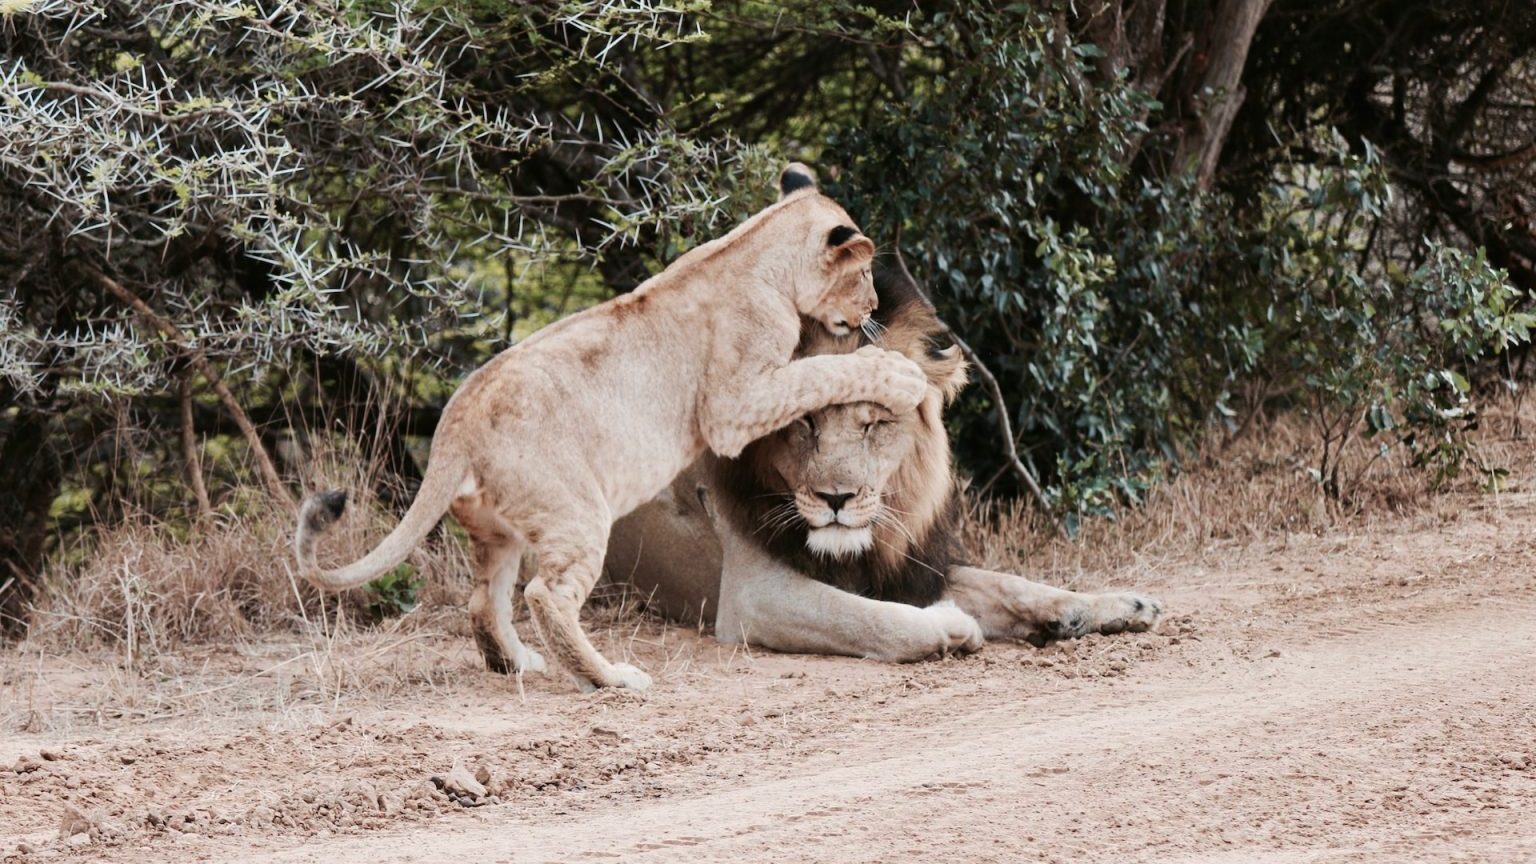 a couple of lions playing with each other on a dirt road.